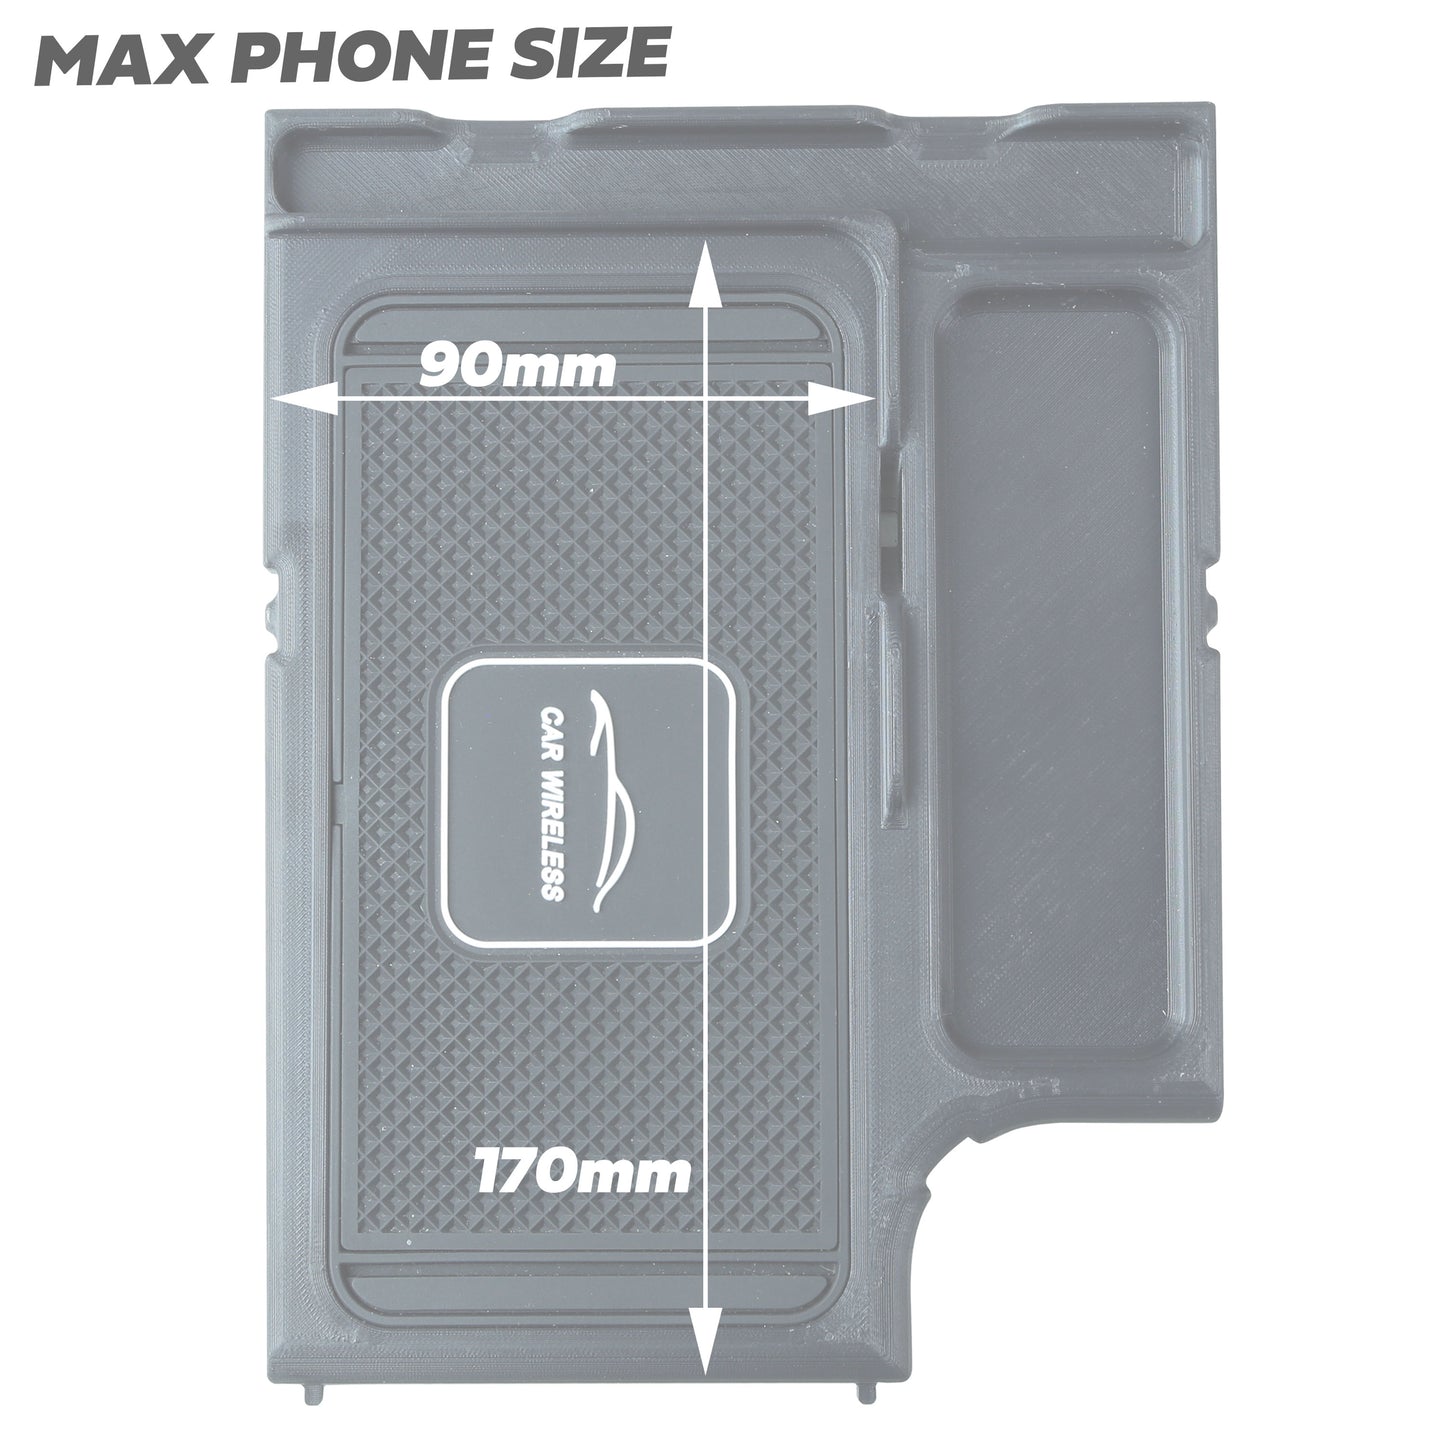 Wireless Charging Tray for Land Rover Freelander 2 (2012+) - TYPE B